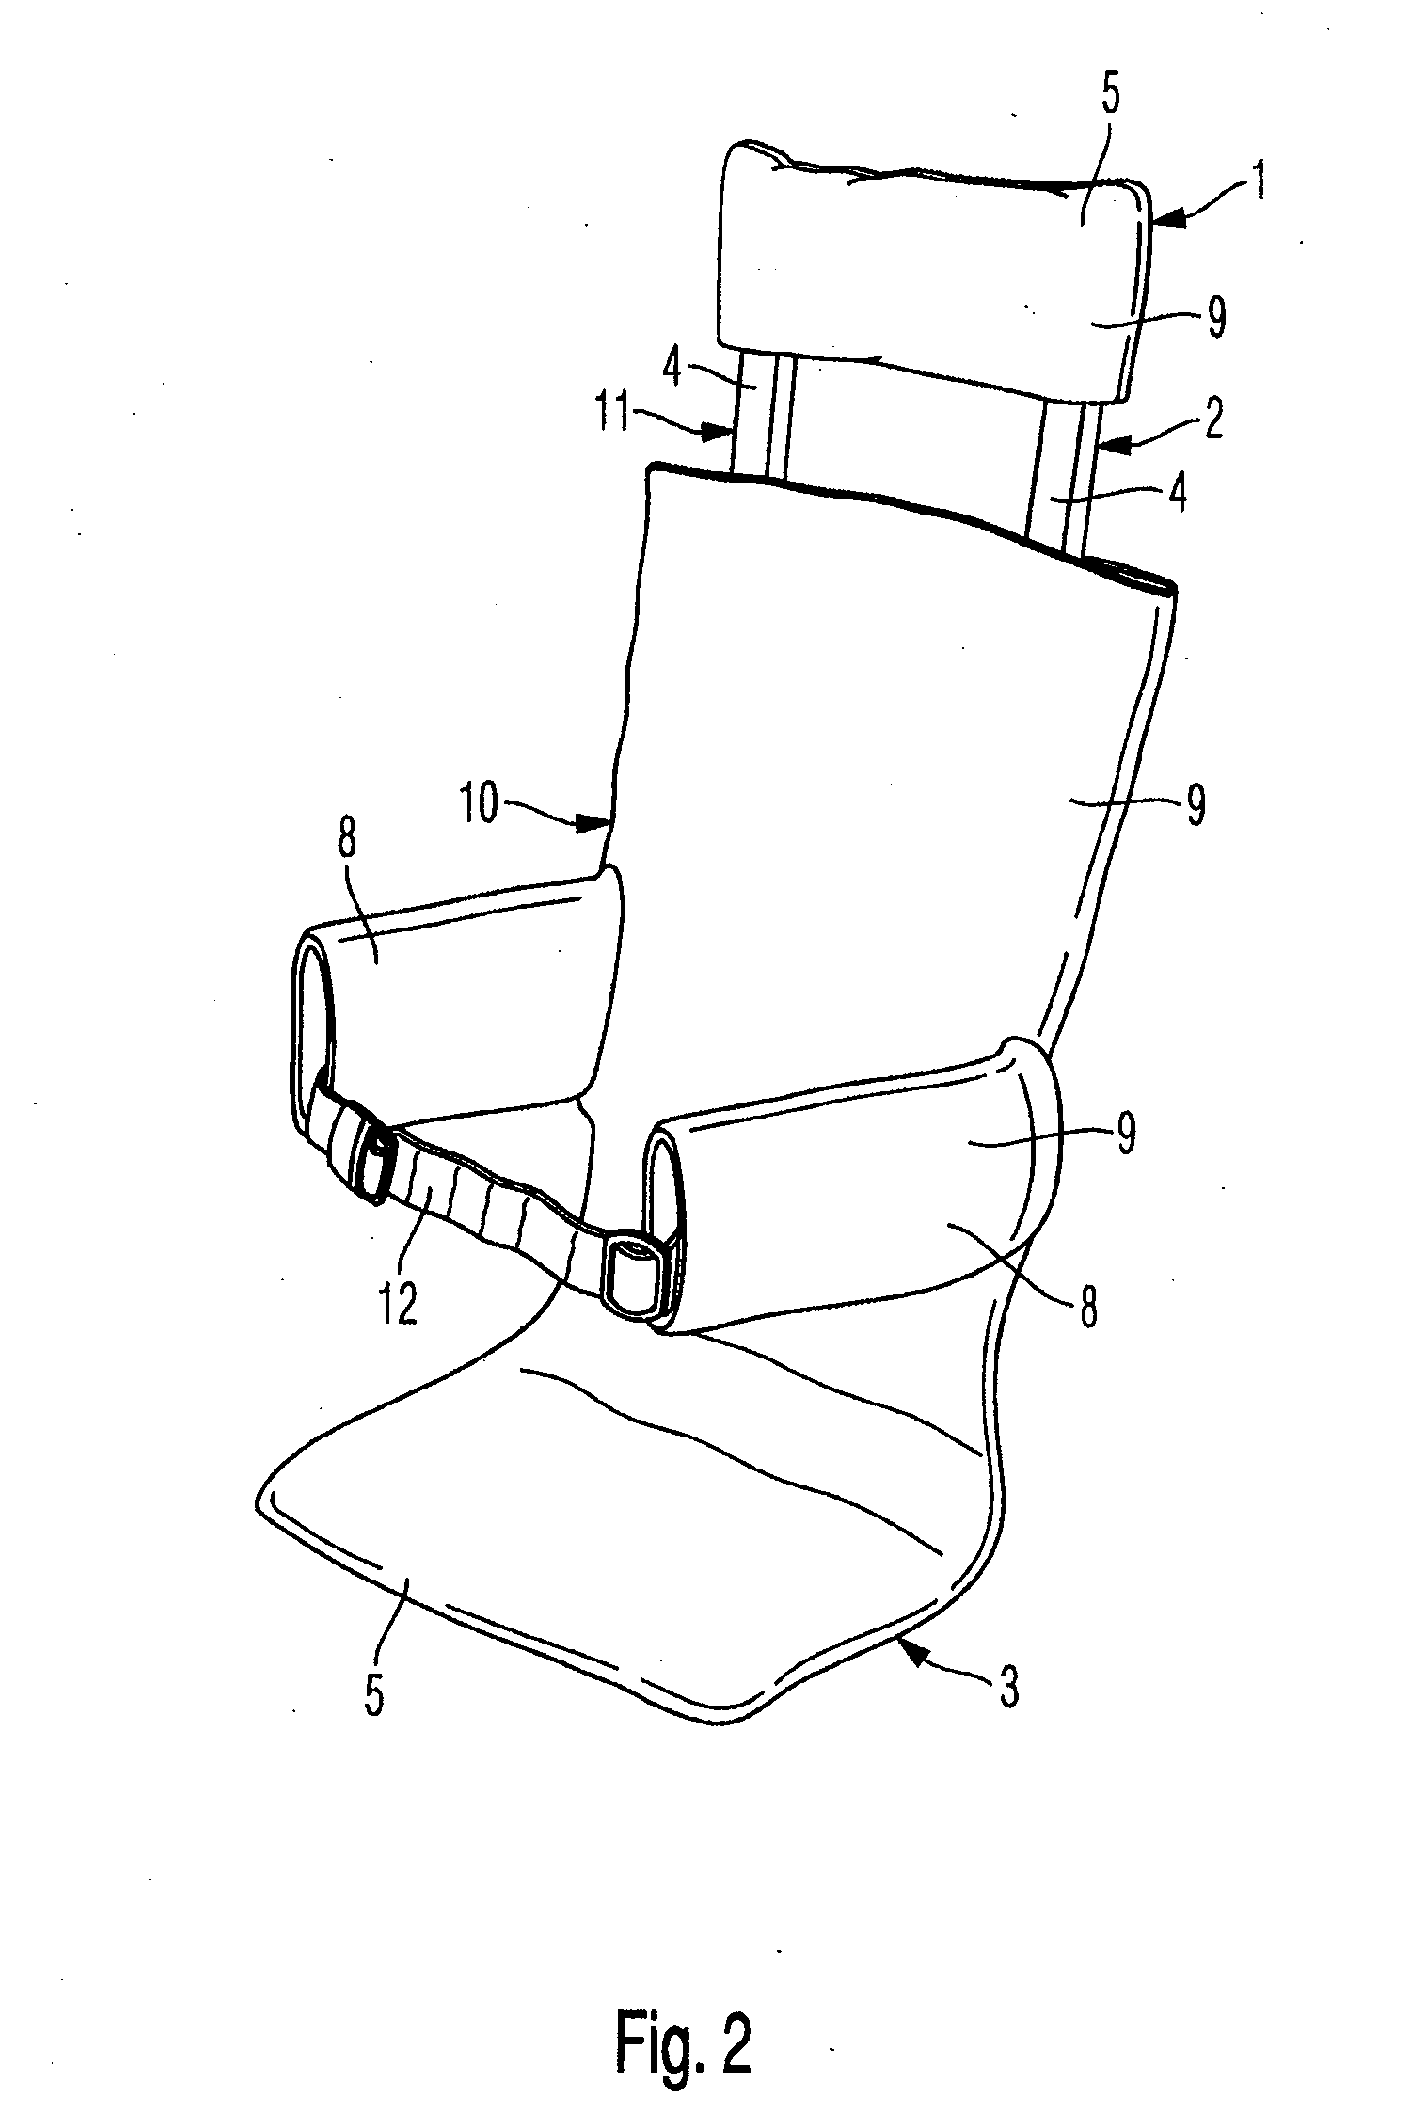 Child Seat Device for a Child and Stroller